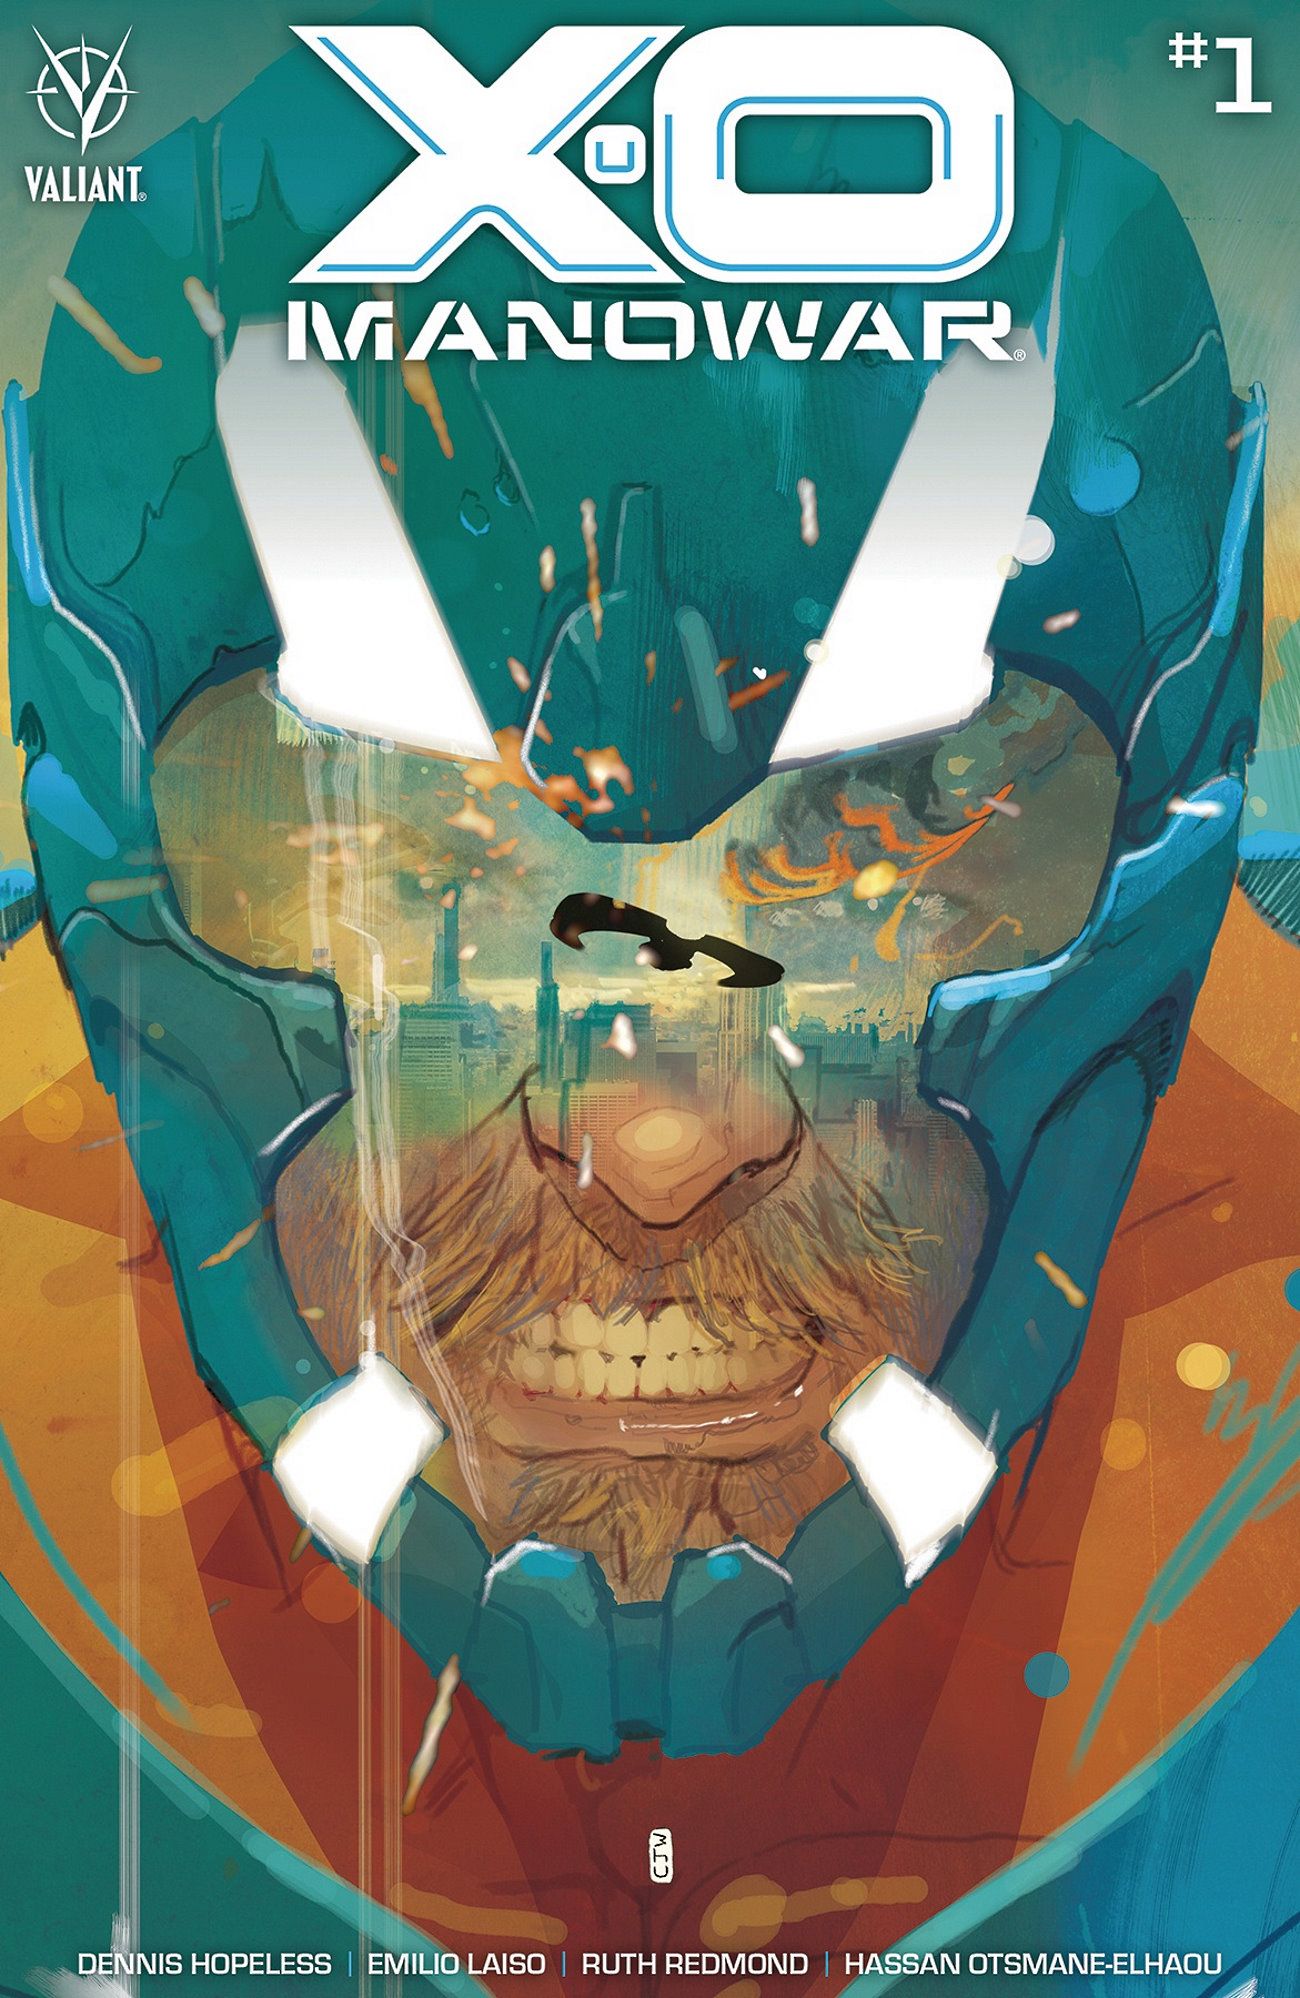 X-O Manowar #1 Review: This Buddy-Cop Space Opera Hits The Mark